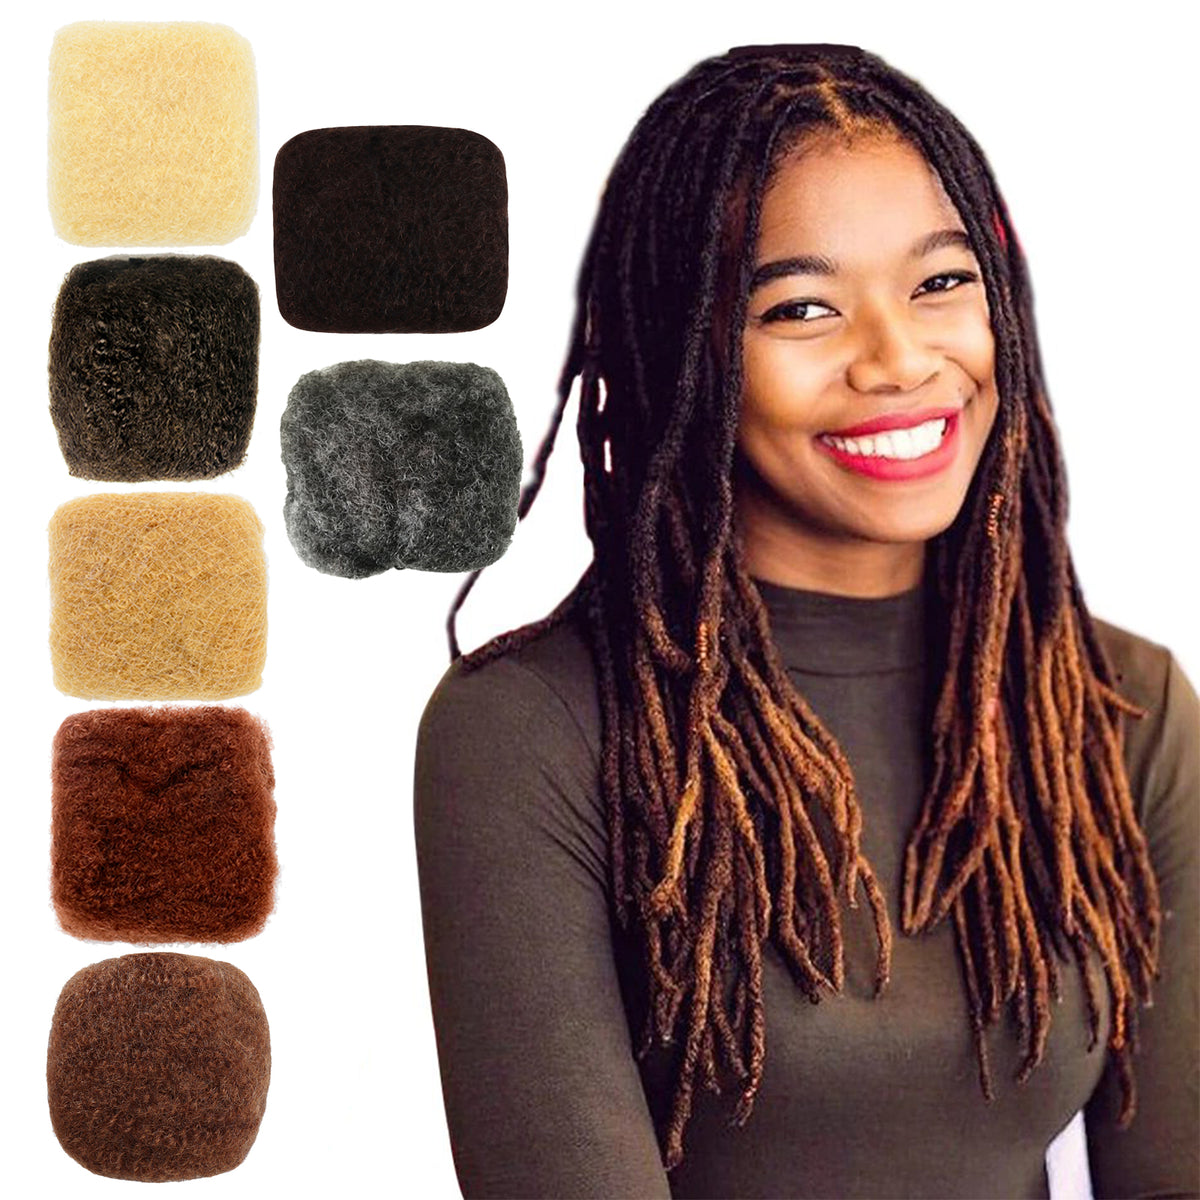 Afro Kinky Human Hairs For Making,Repairing & Bulking Locs 10 Inch Long Afro Kinky Bulk Human Hair For Dreadlock Extensions 100% Natural Afro Hairs For Twisting & Braiding 29g/1Oz (33/ Dark Auburn, 10 inch)